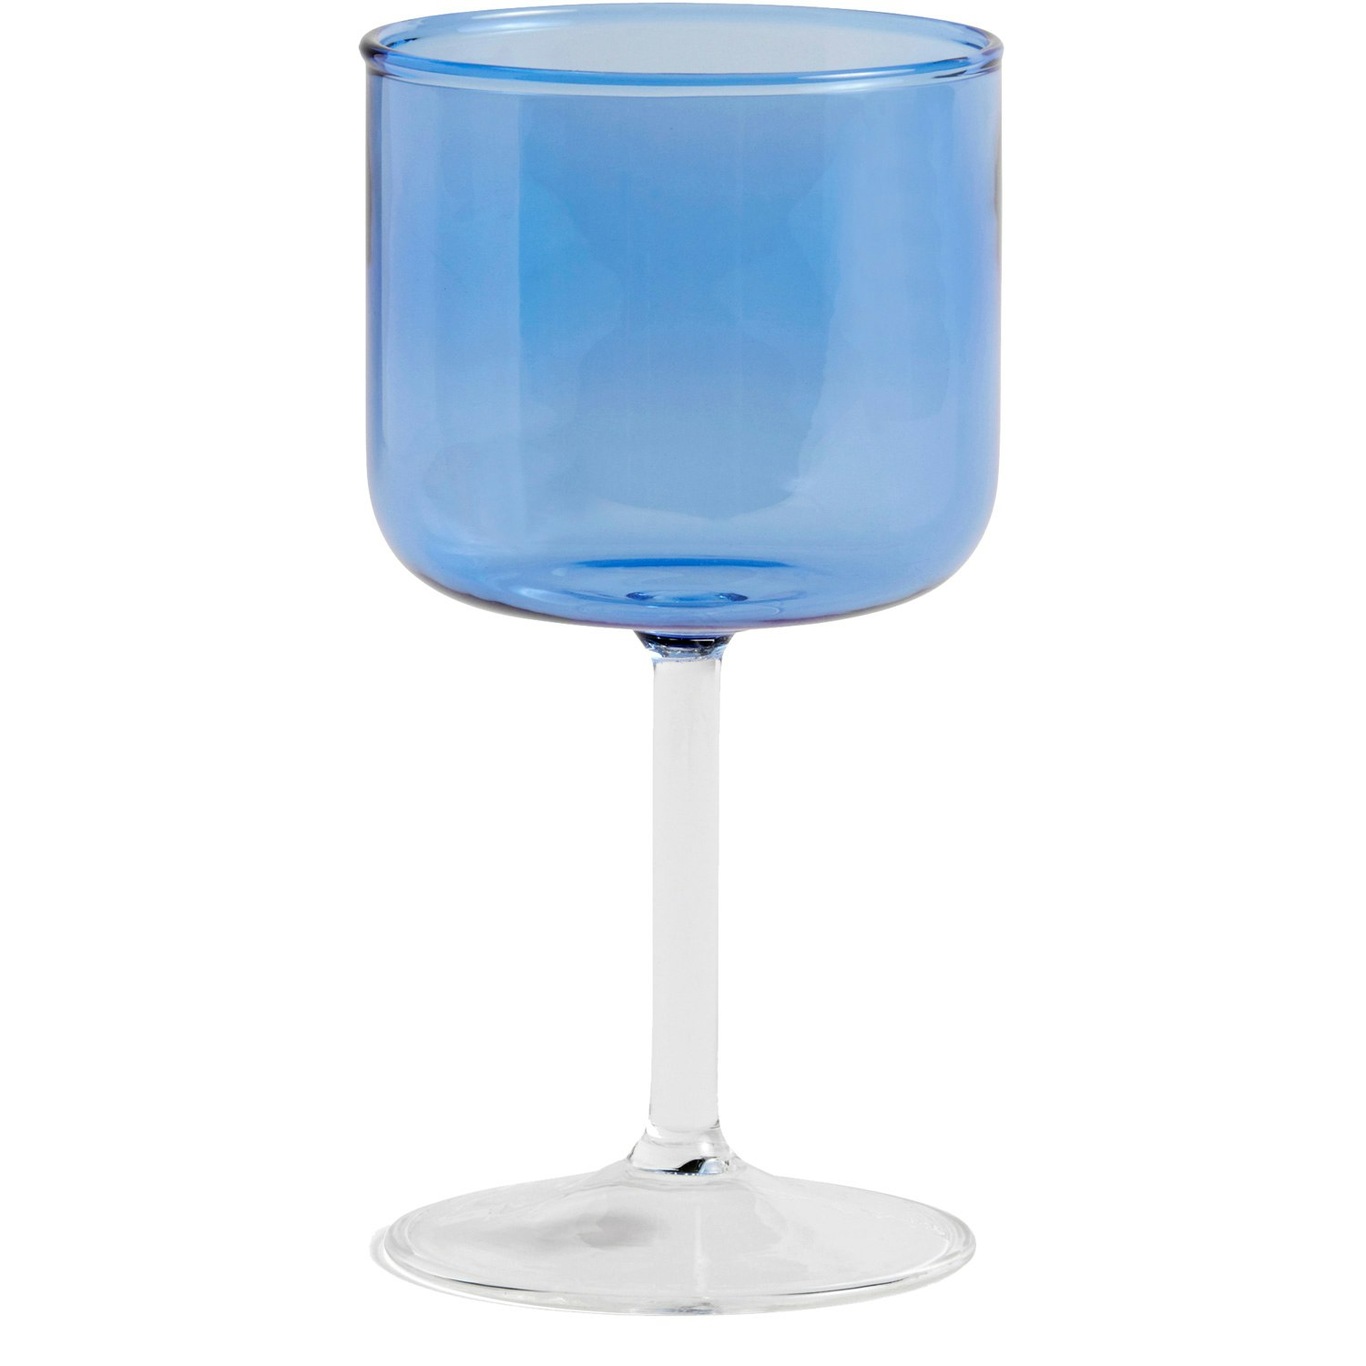 Tint Wine Glass 2-pack, Blue / Clear